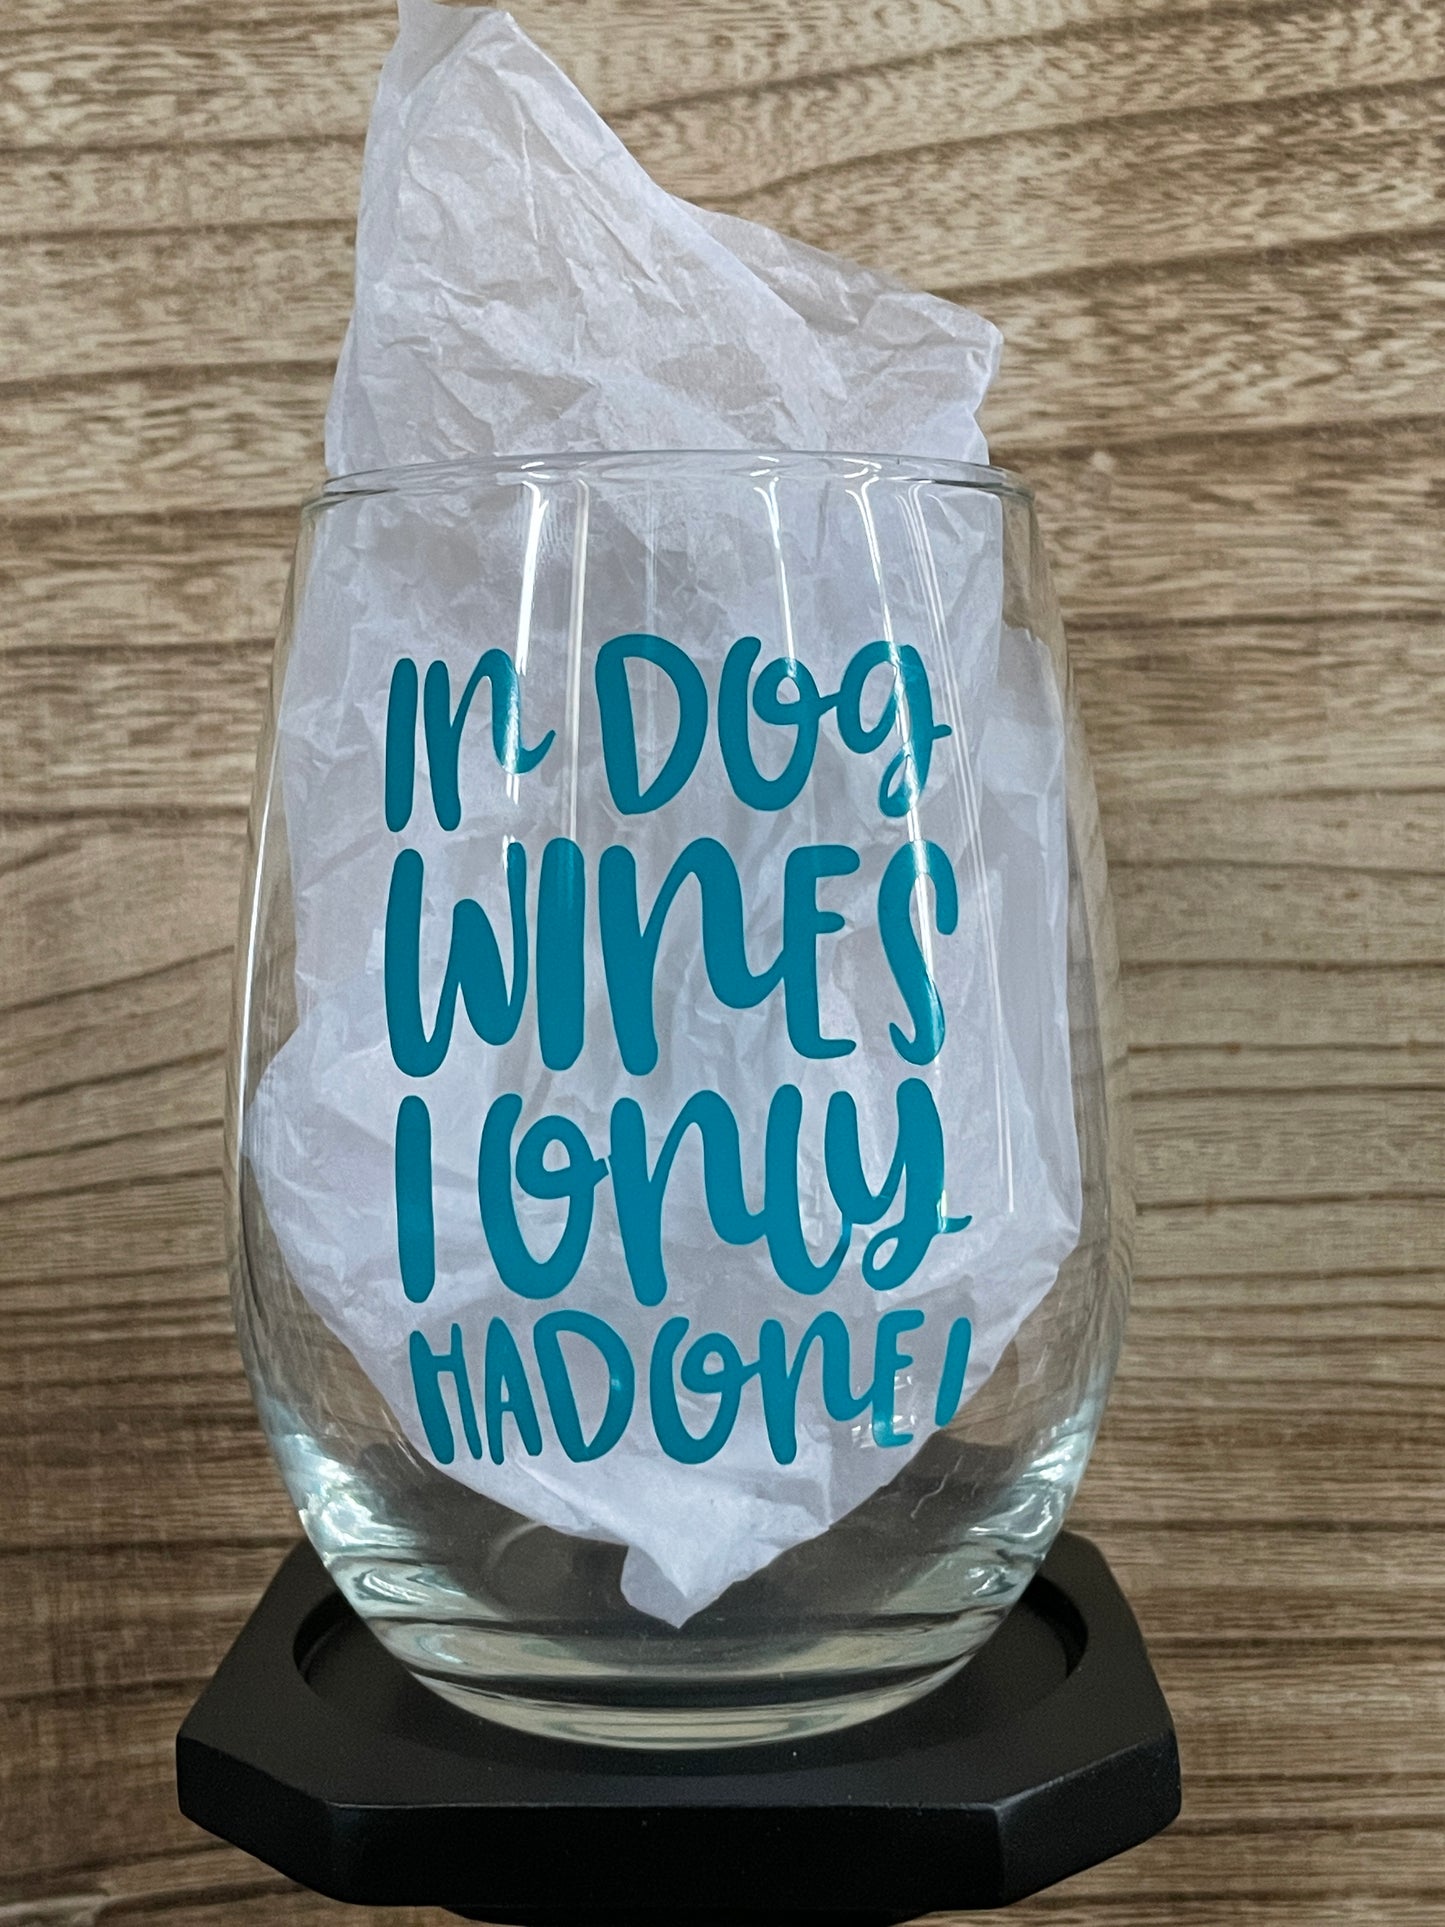 In DOG wines I only had one Wine Glass